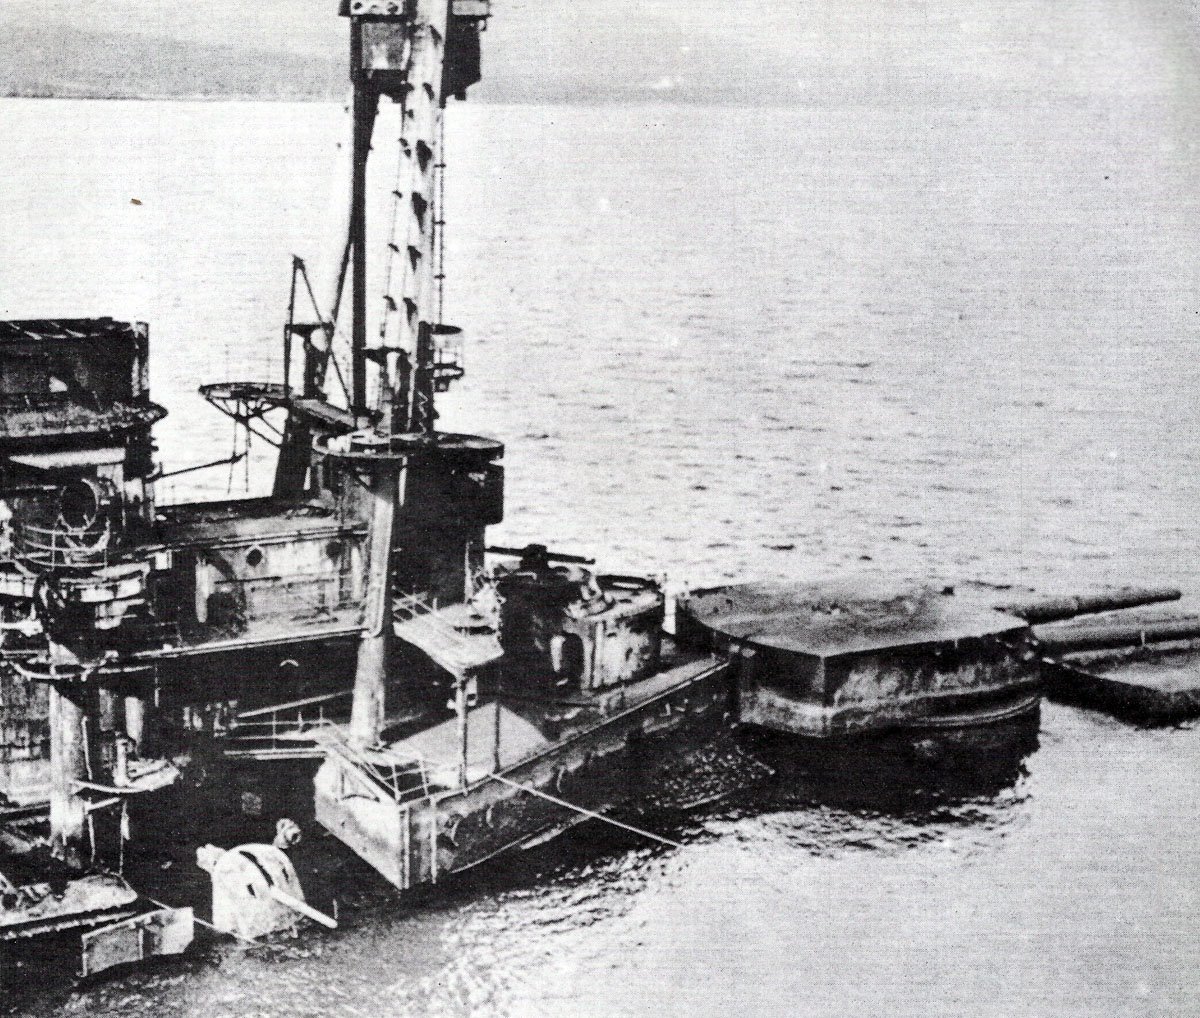 warship sunk by its crew in Scapa